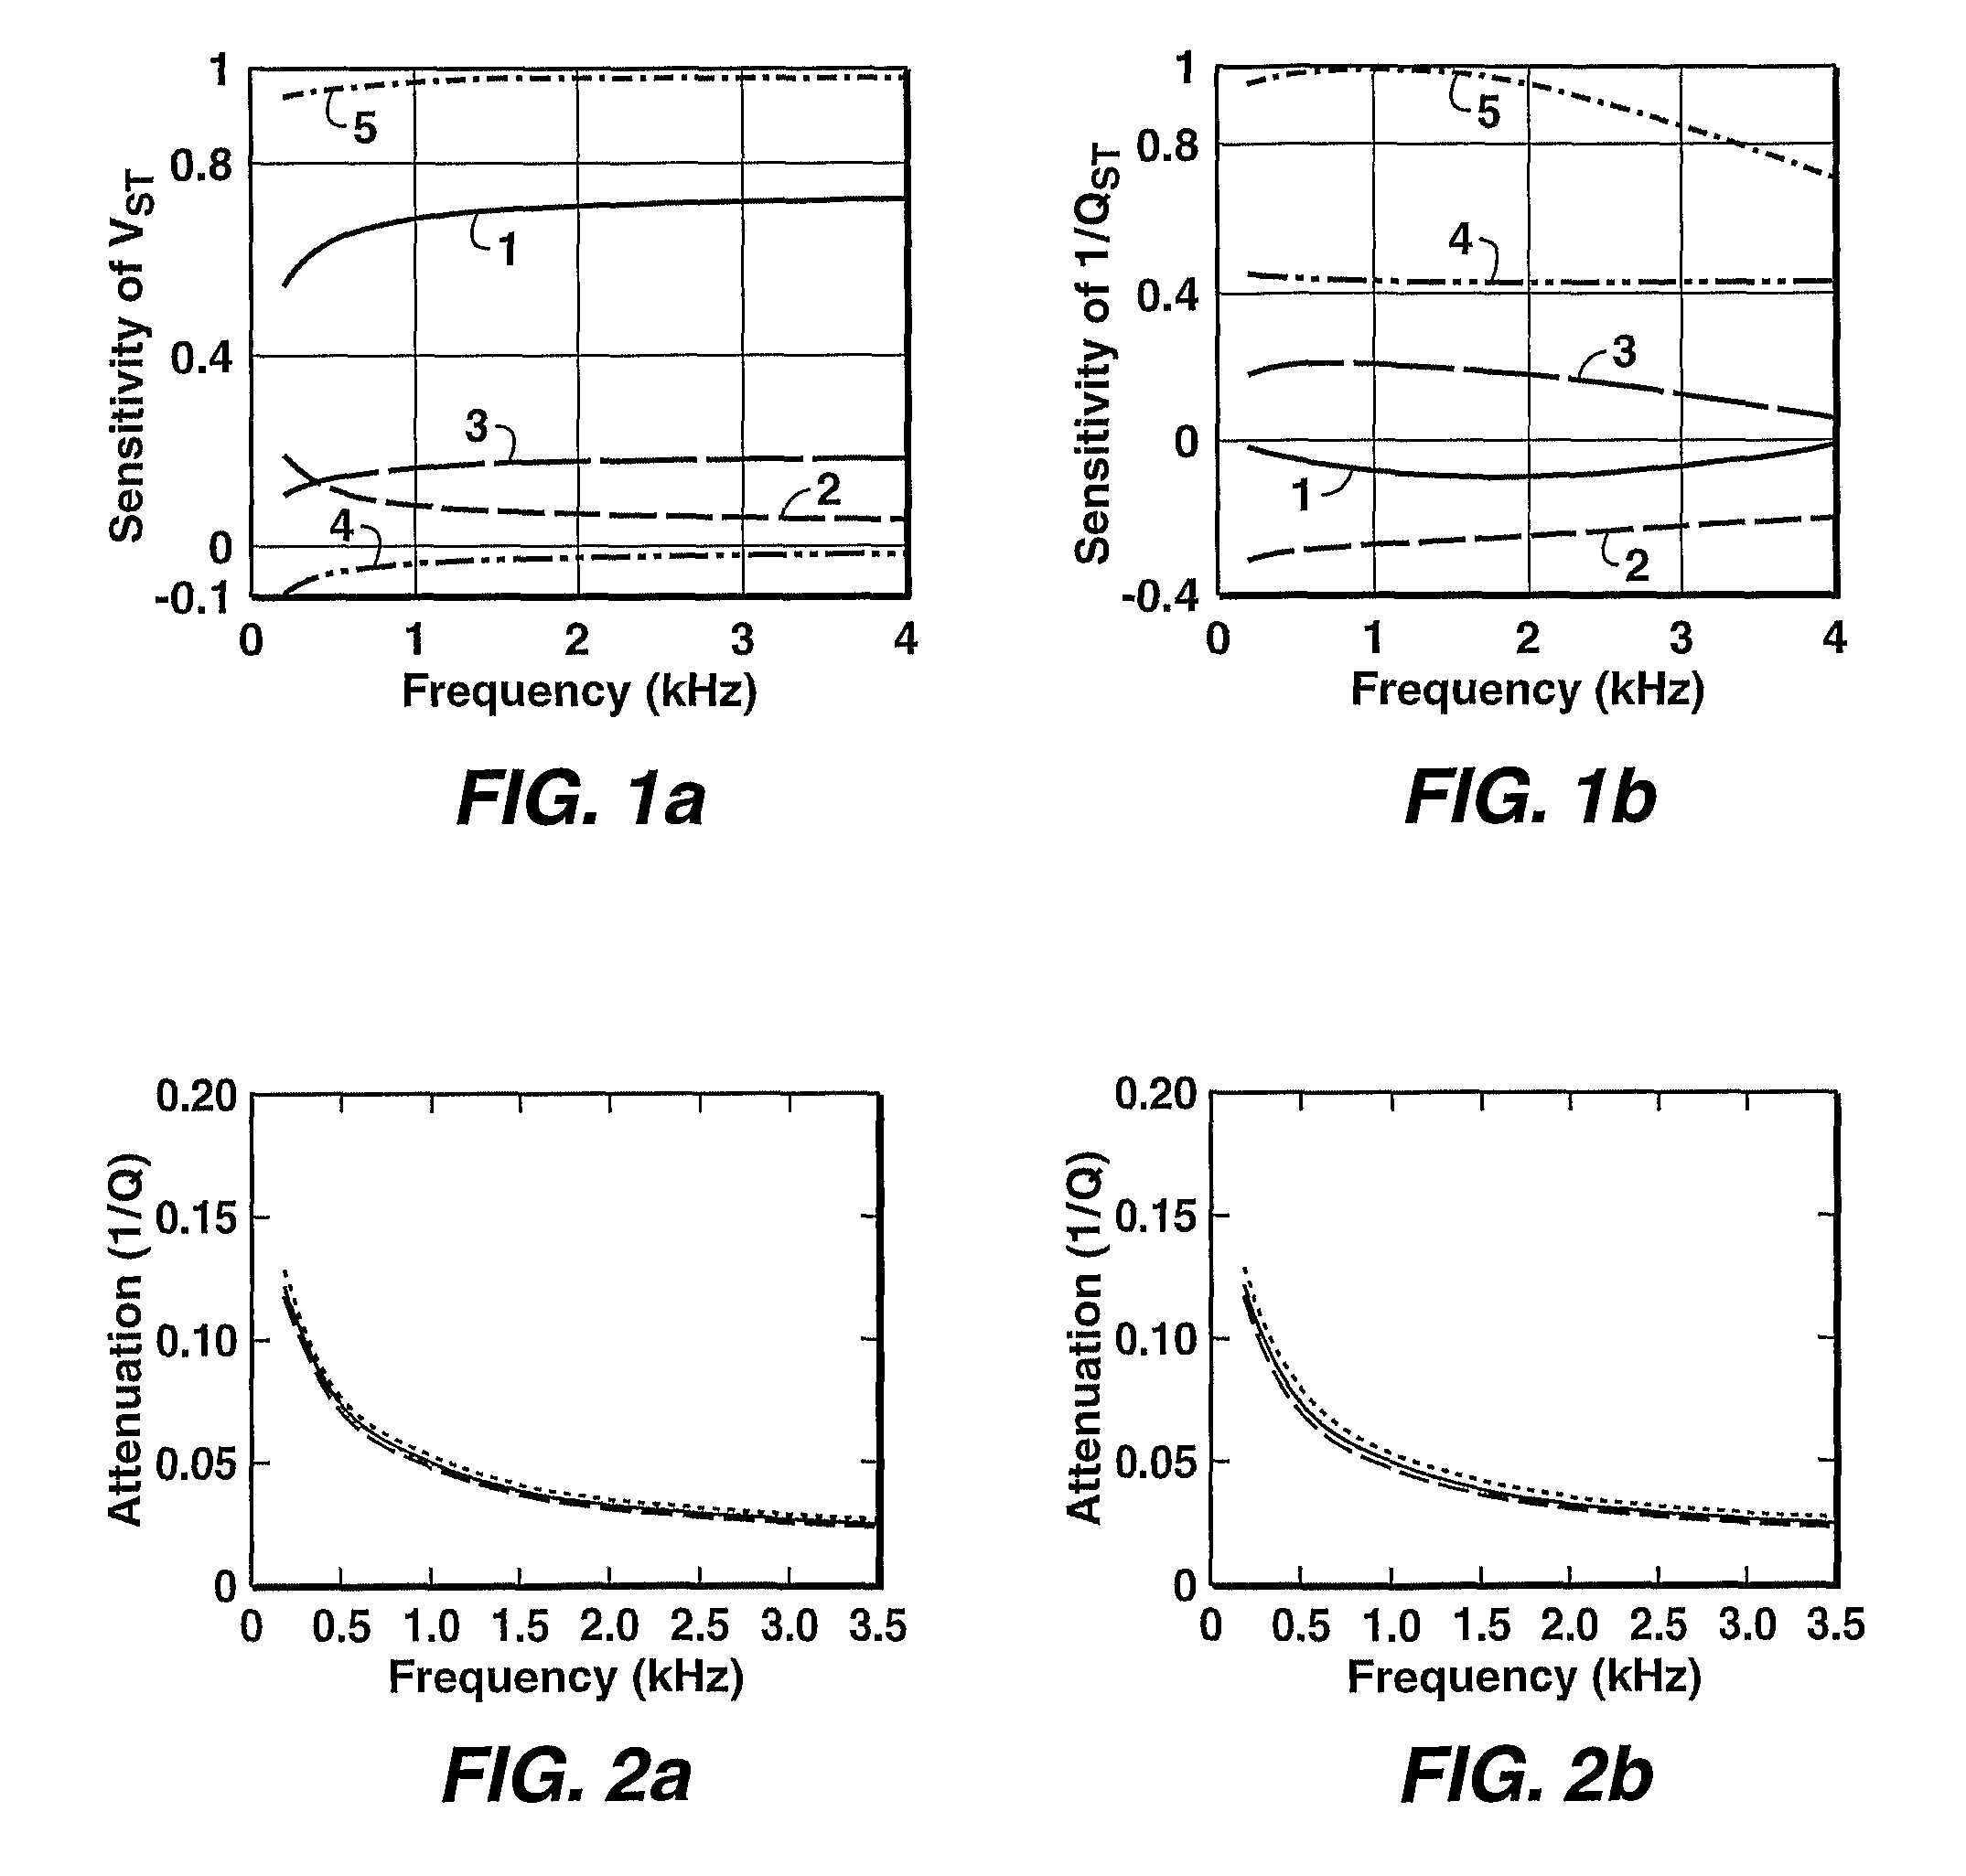 Method for determining reservoir permeability form borehole Stoneley-wave attenuation using Biot's poroelastic theory